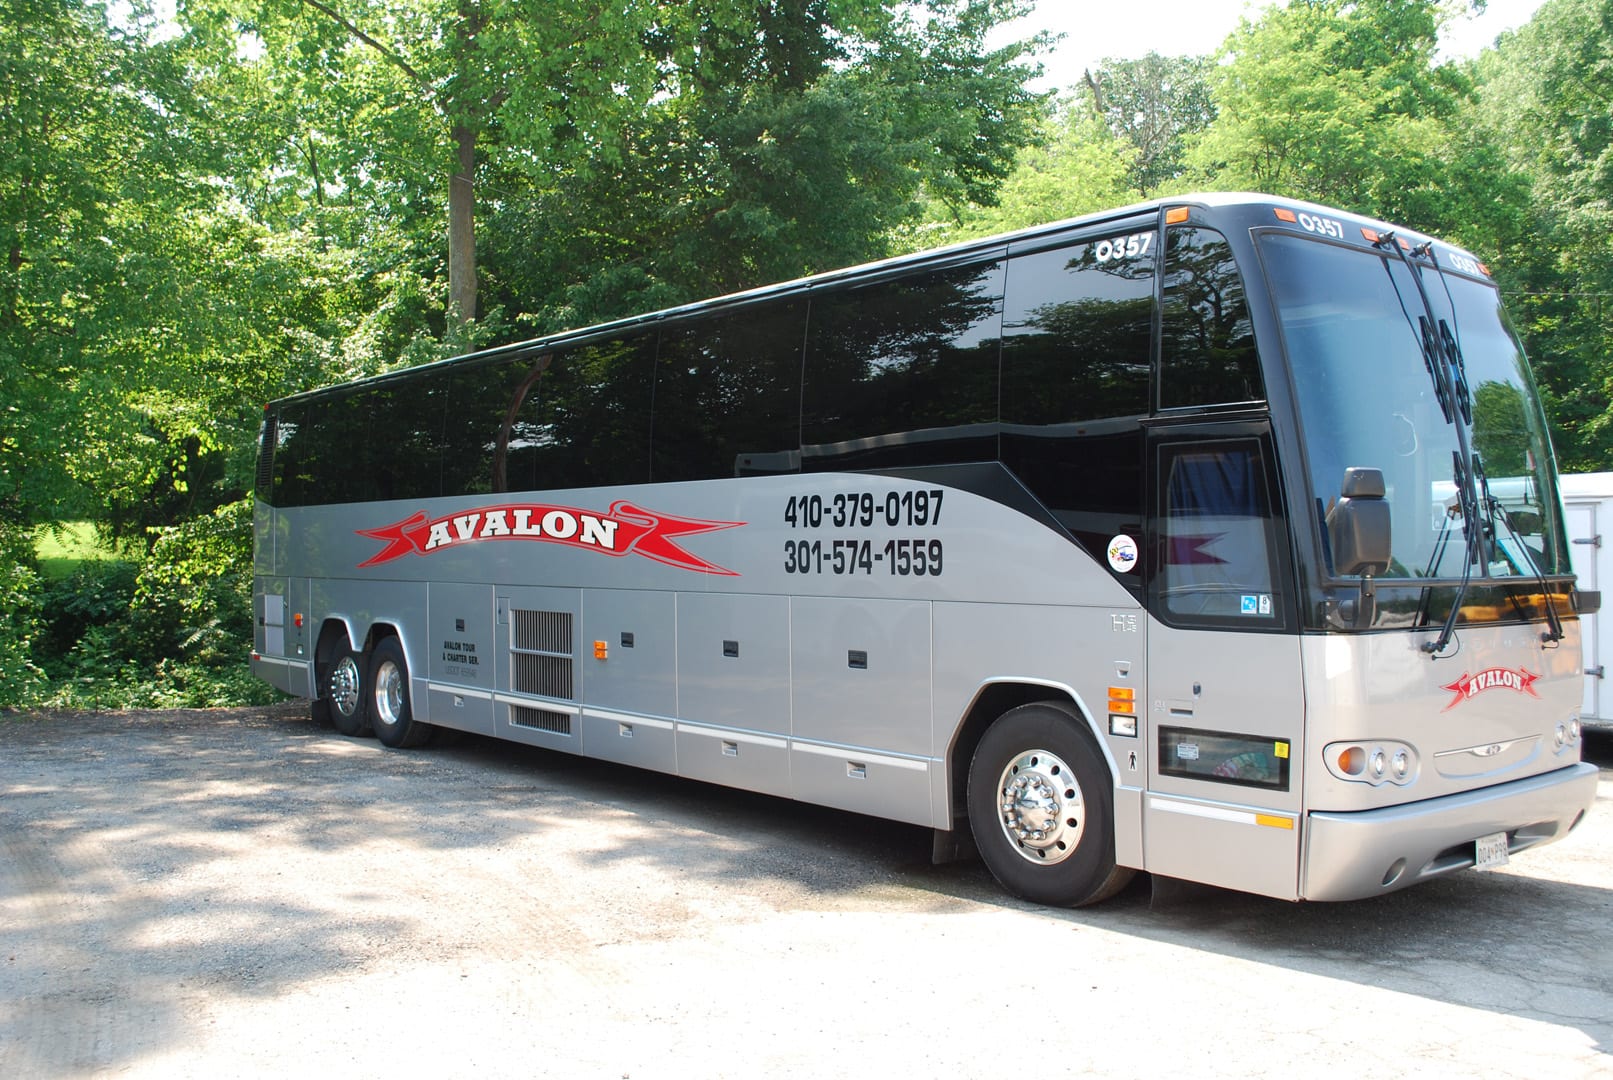 Left Side View of the Avalon Bus with a Phone Number